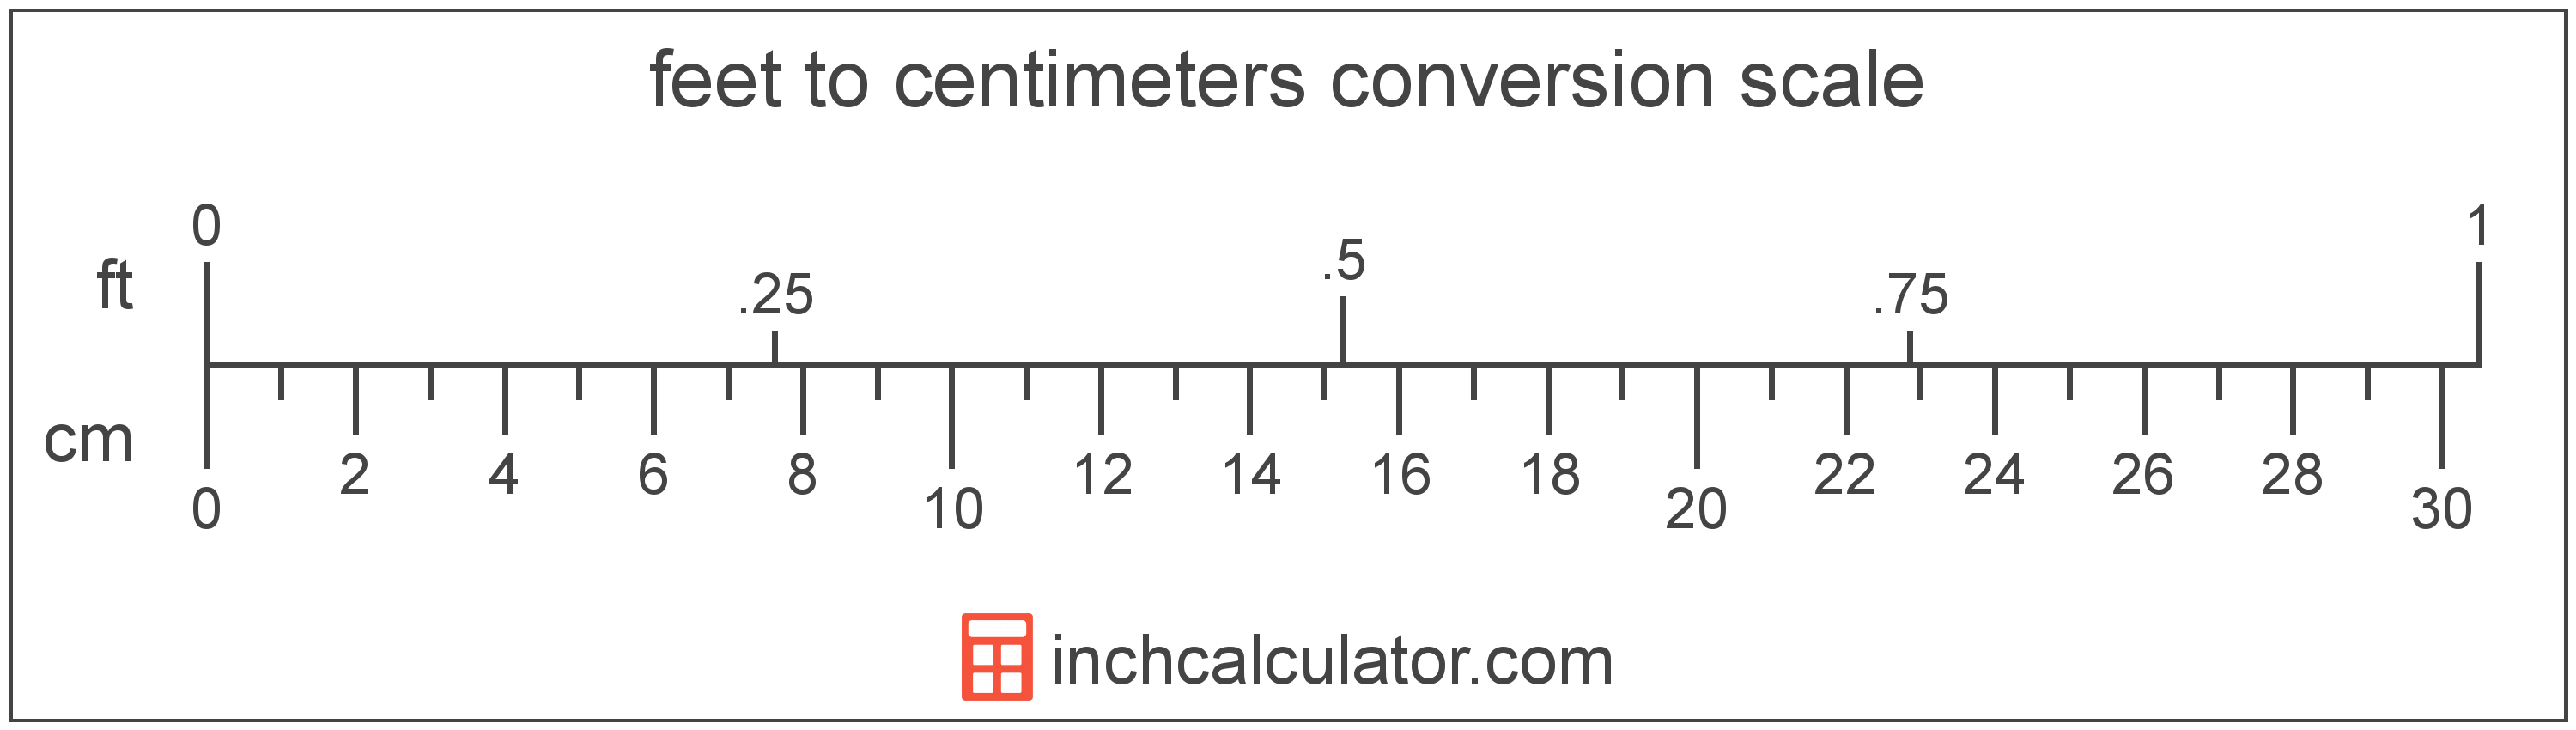 conversion scale showing centimeters and equivalent feet length values